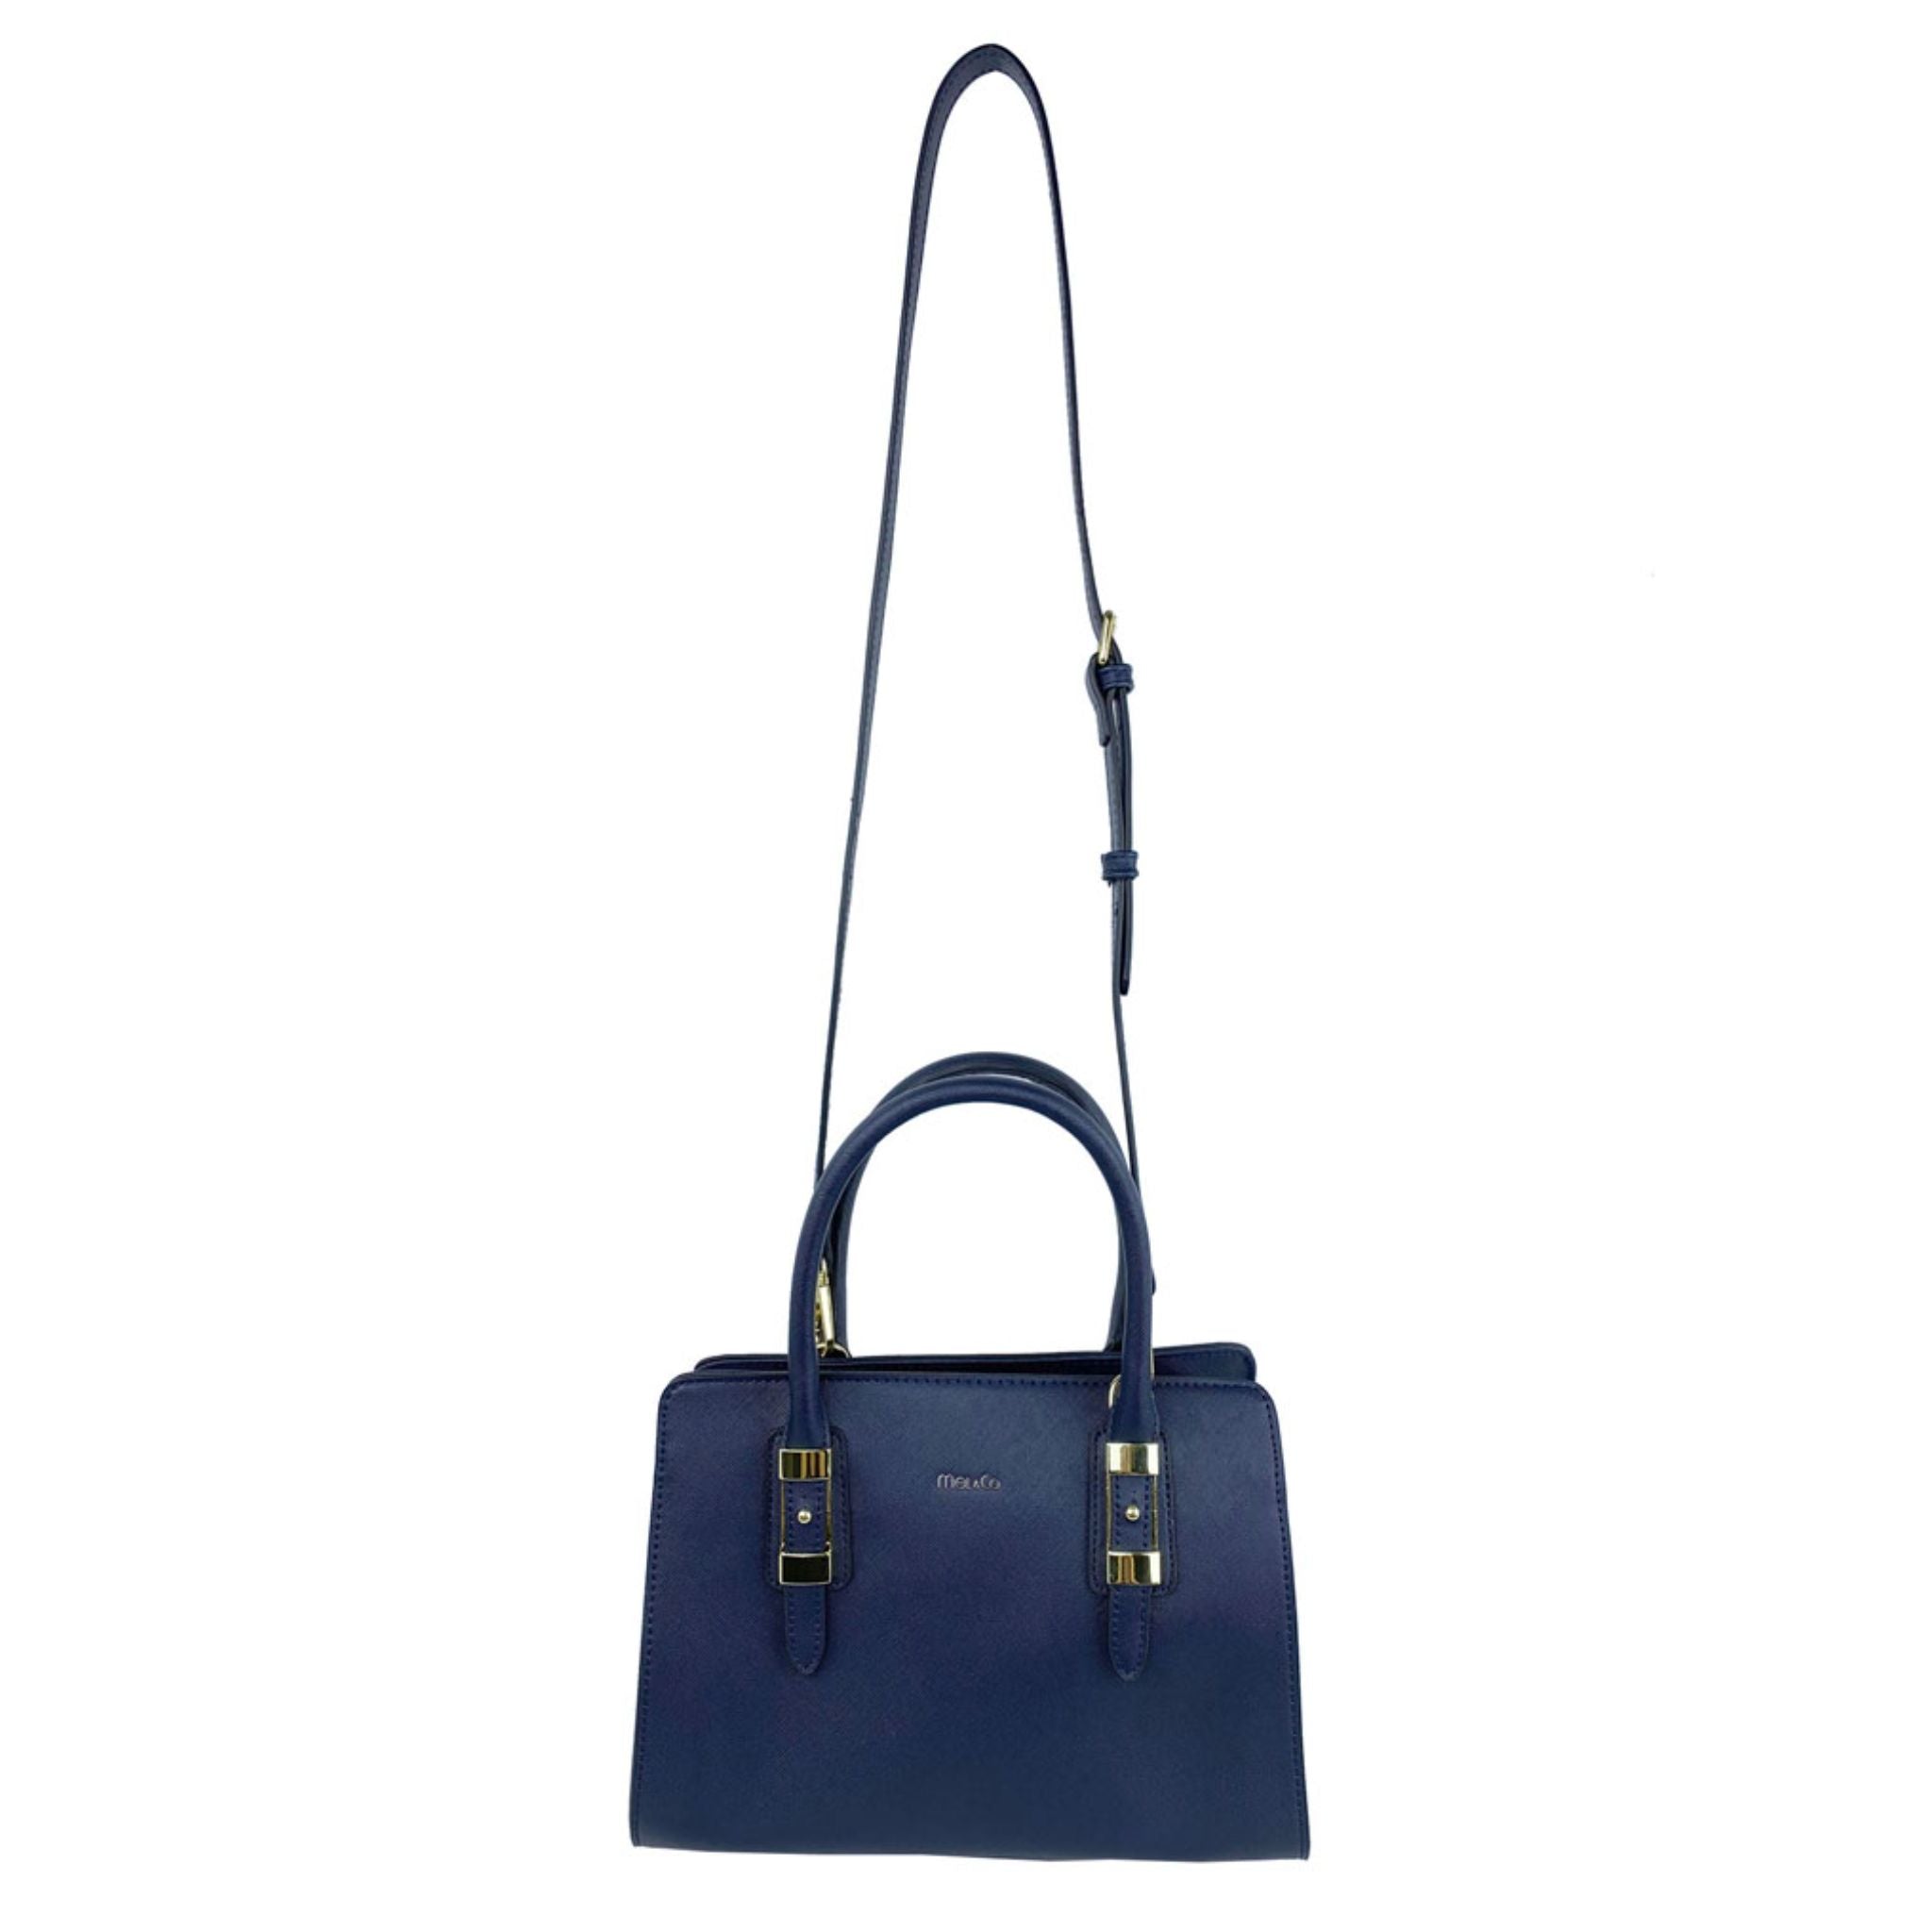 Mel&Co Saffiano-Effect Satchel With Metal Buckle Detail Navy